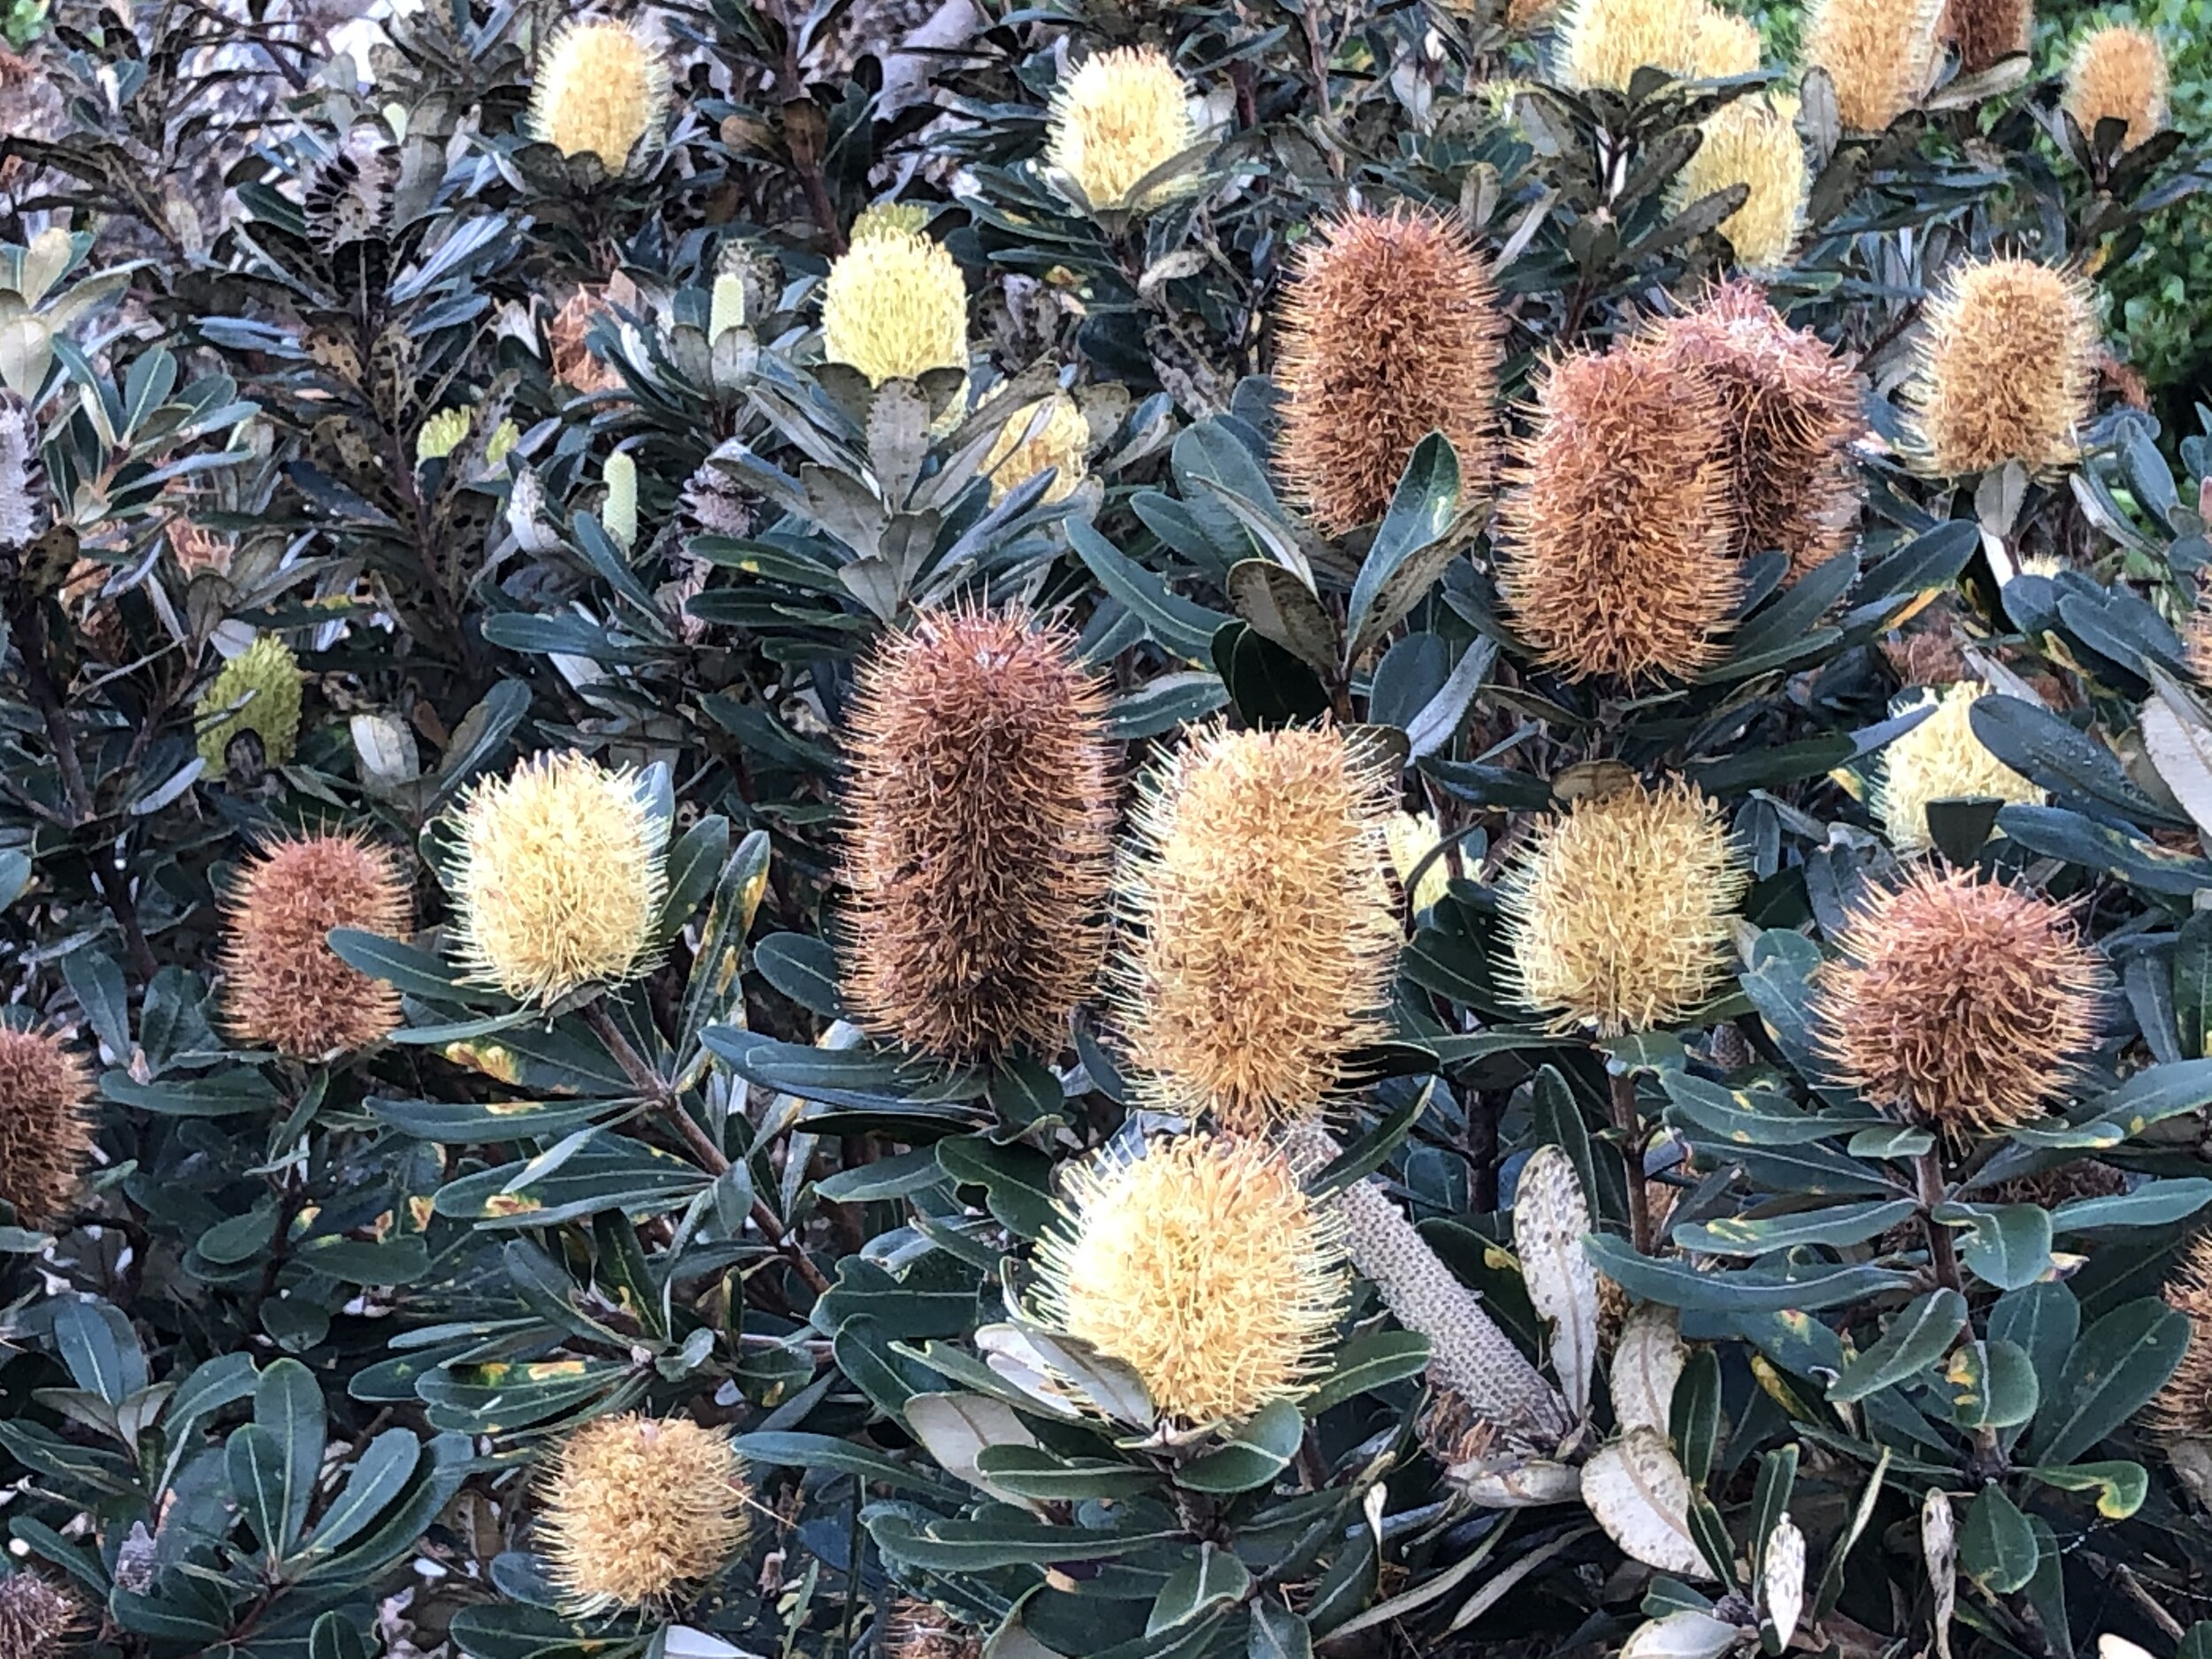  The Coastal Banksias that formed the subject of artist Ash’s work for The White Bluff Project bloom in winter along the coast and at the White Bluff site itself. They support a vibrant community of nectar eating birds. Known scientifically as Banksi